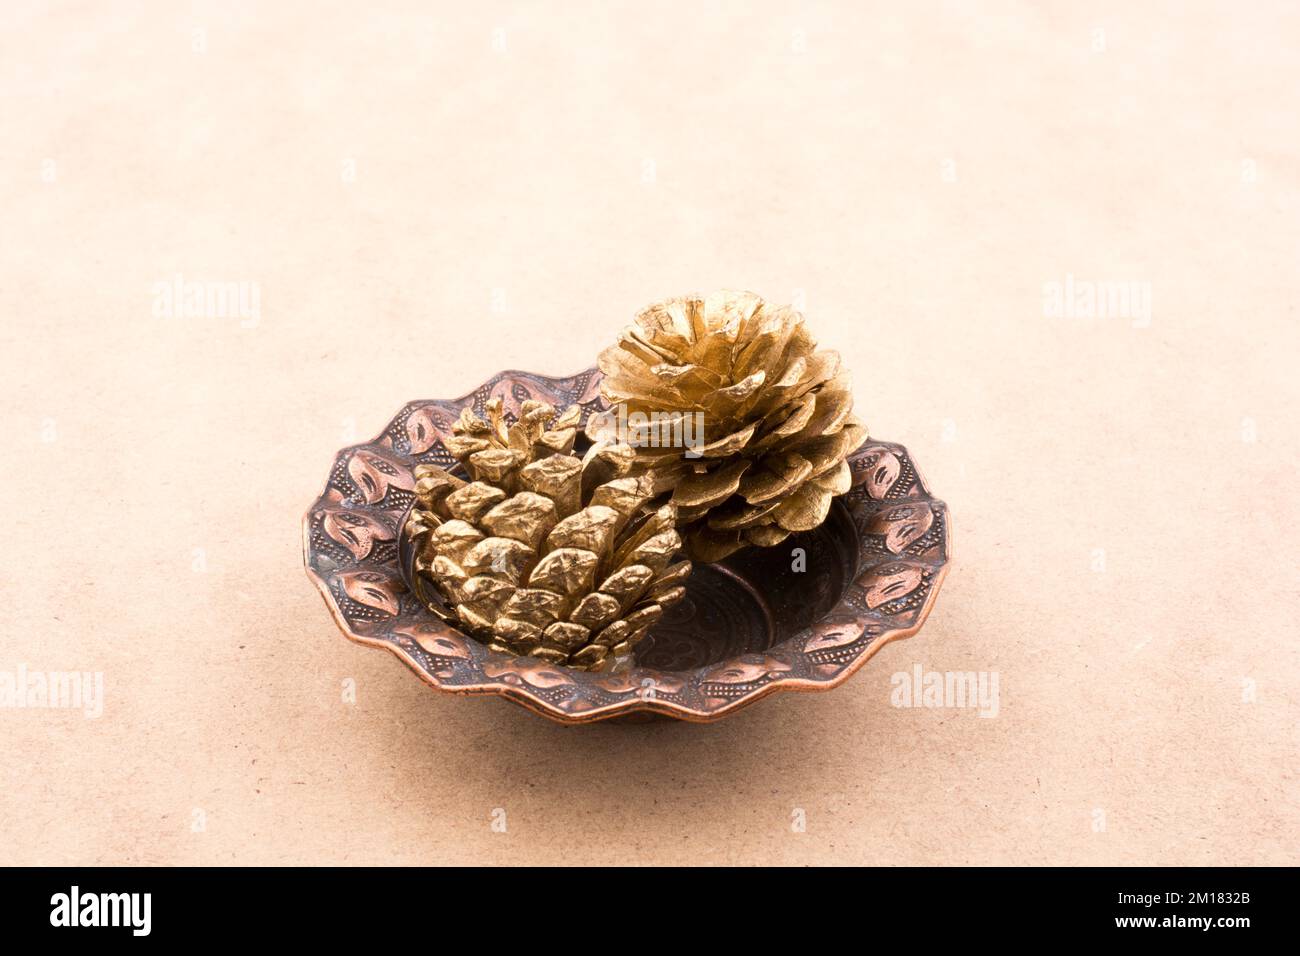 Pine cone on a light brown background Stock Photo